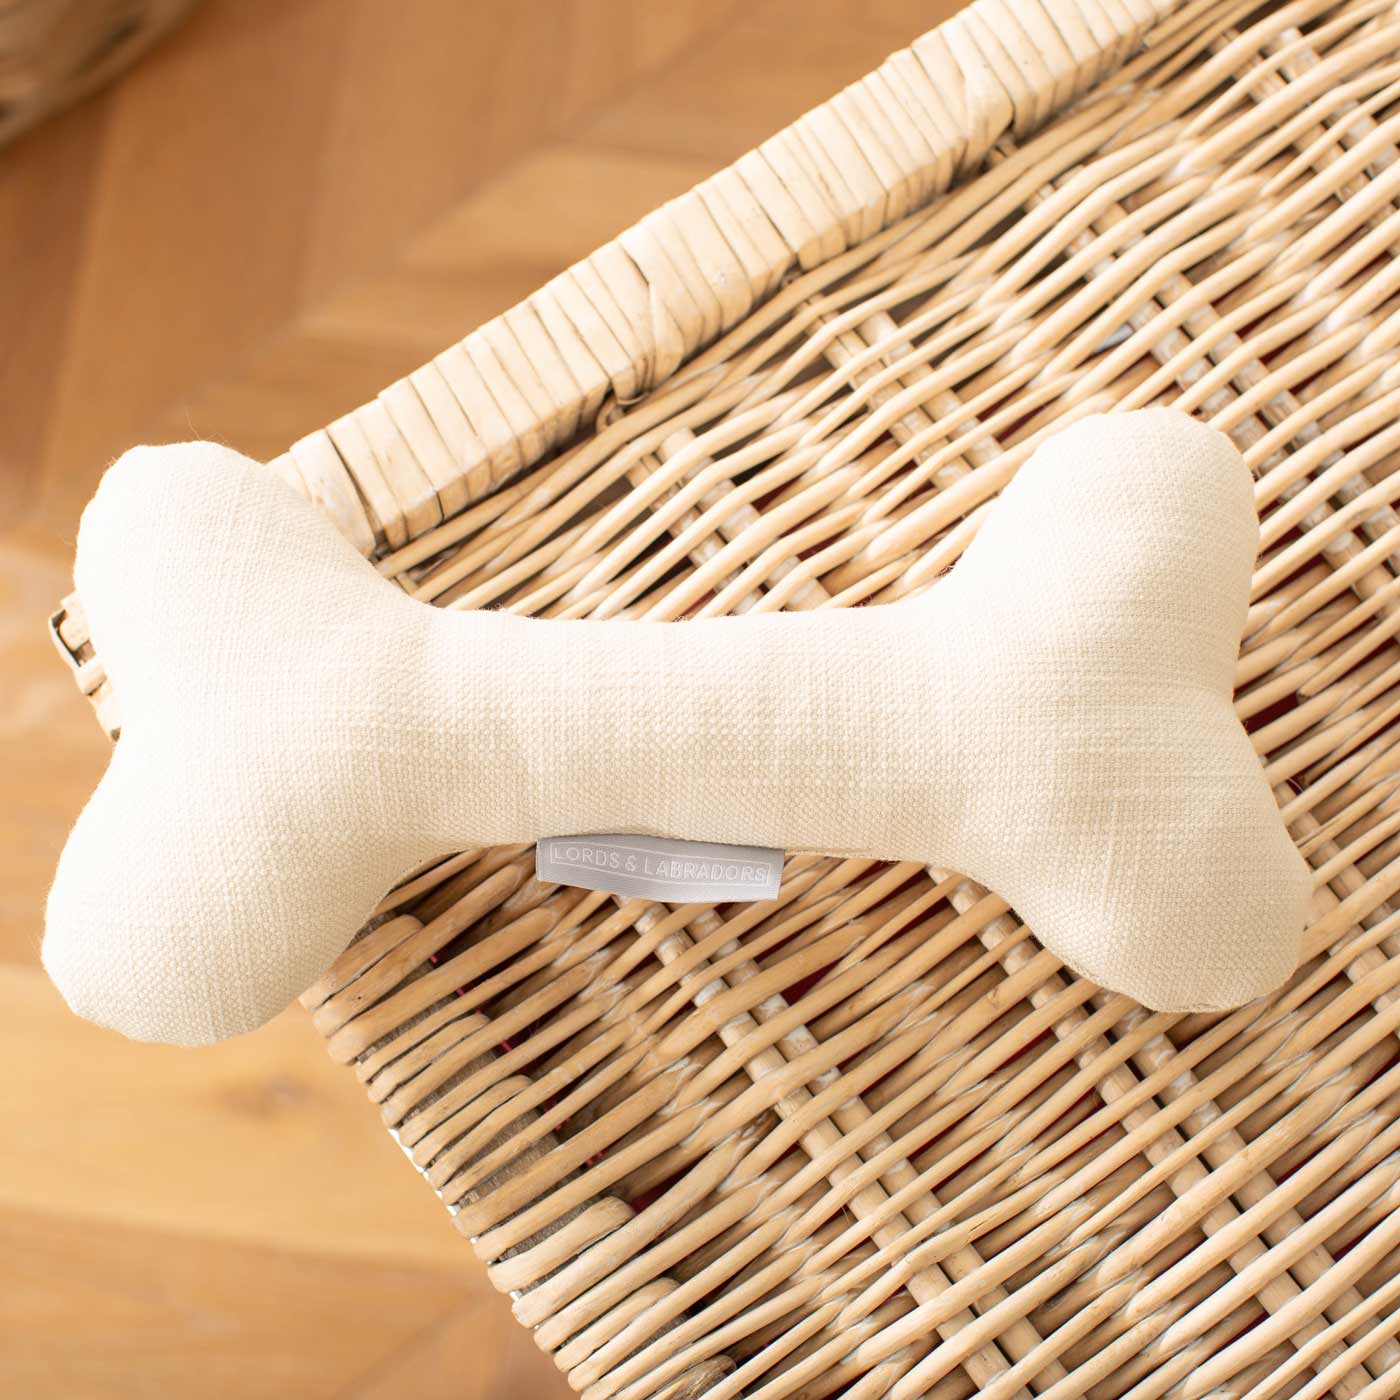 Present The Perfect Pet Playtime With Our Luxury Dog Bone Toy, In Stunning Savanna Bone! Available To Personalize Now at Lords & Labradors US